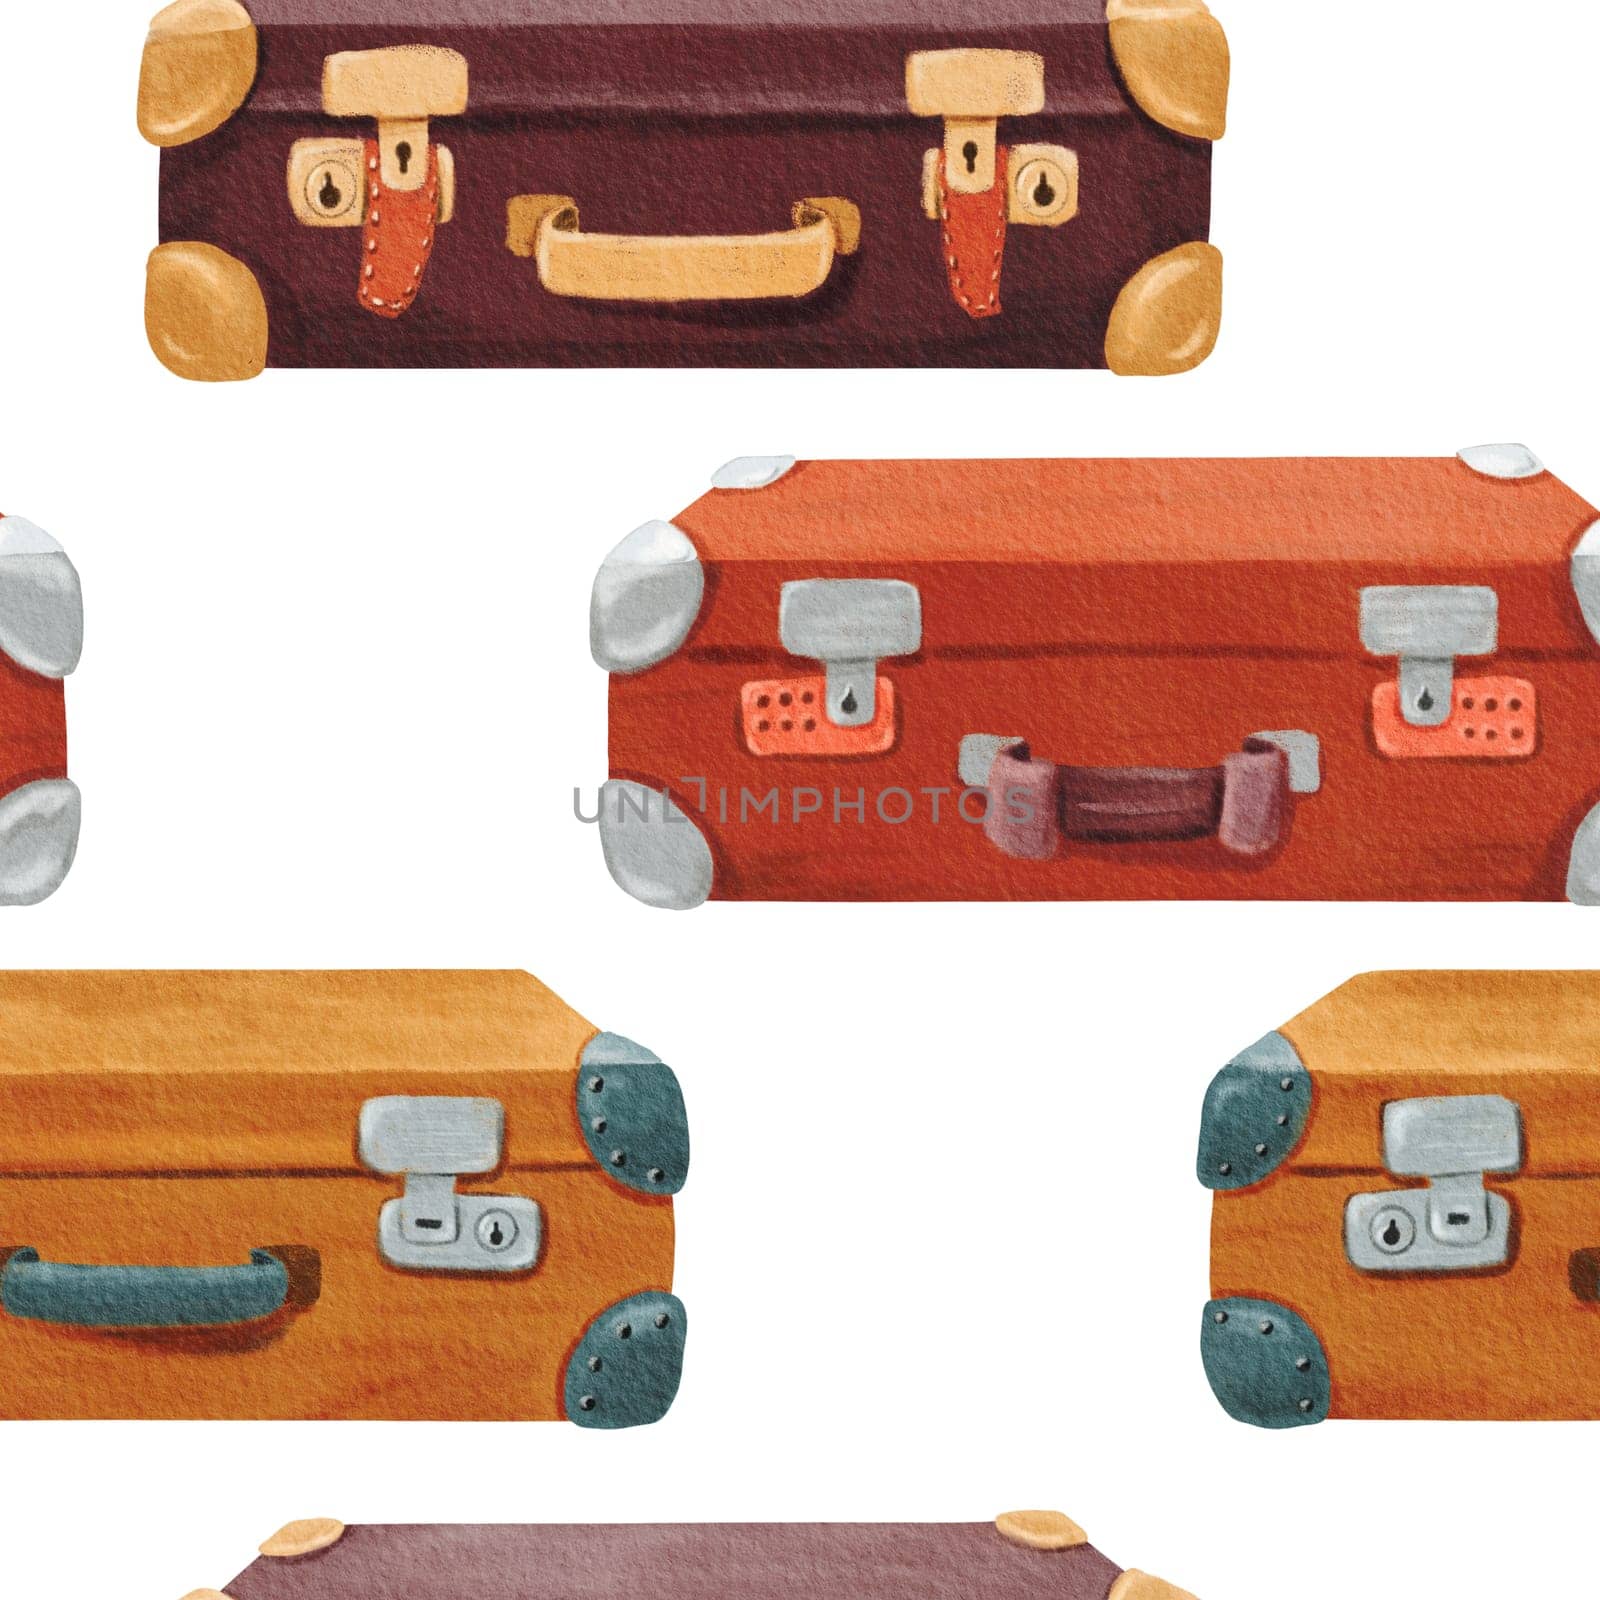 Seamless pattern of Stylish brown retro suitcase with inserts, digital code. Old vintage leather briefcase baggage. Travel stuff. Hand drawn retro bag. Tourist's luggage. Watercolor illustration.